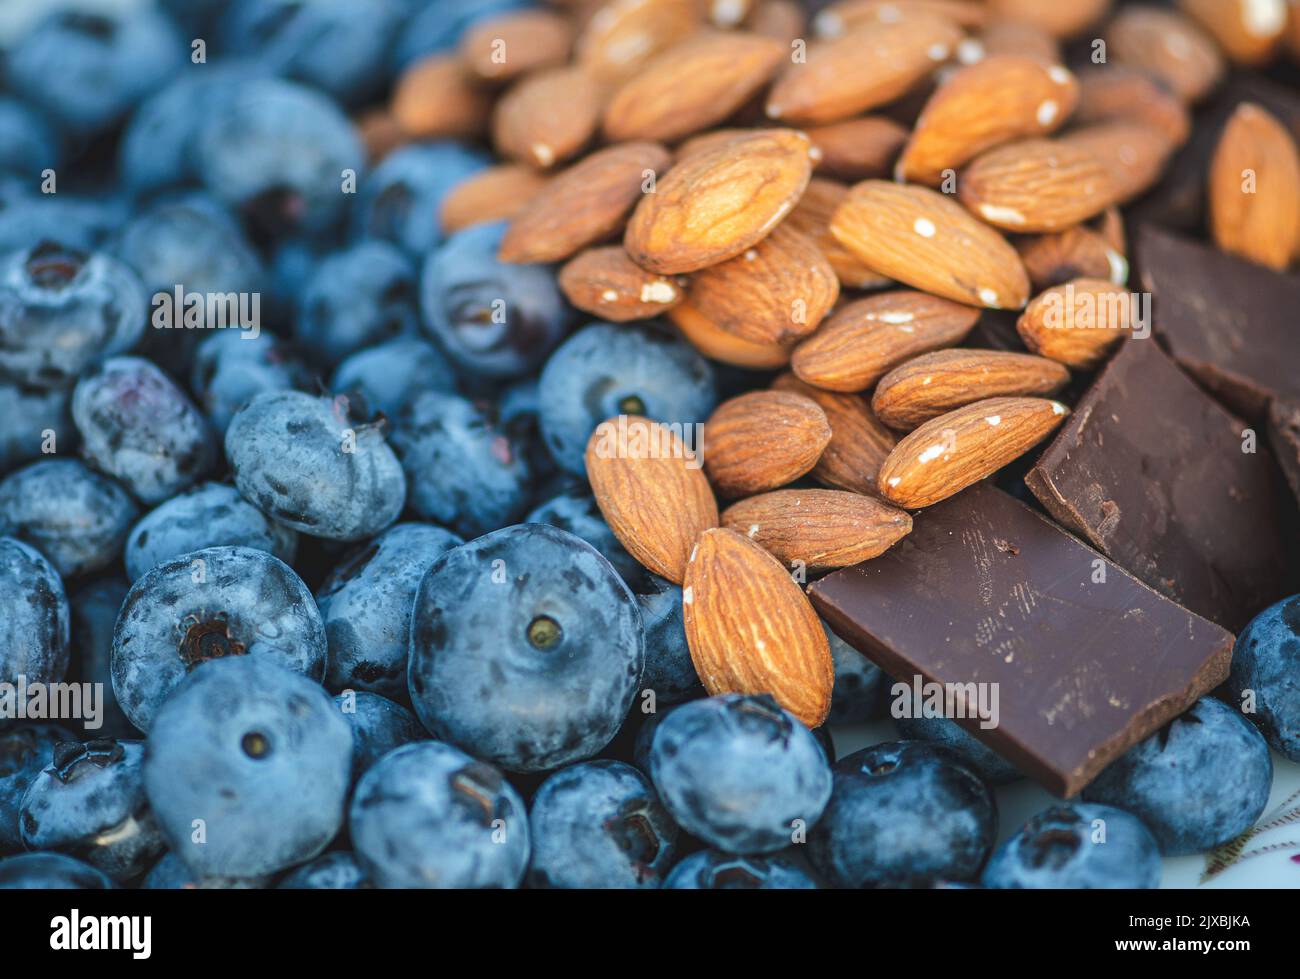 Fresh organic ripe blueberries mixed with unsalted dried almonds and dark chocolate pieces Stock Photo